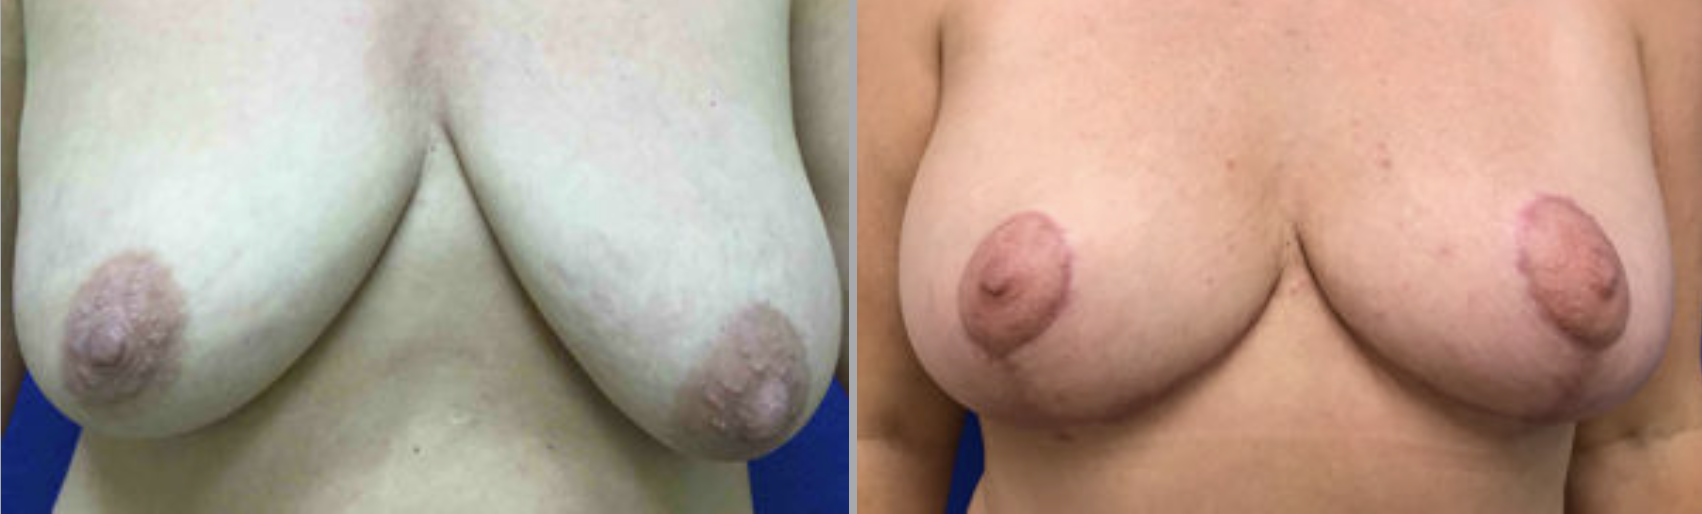 Breast Lift Before and After Pictures Bucks County, PA and Hunterdon County, NJ